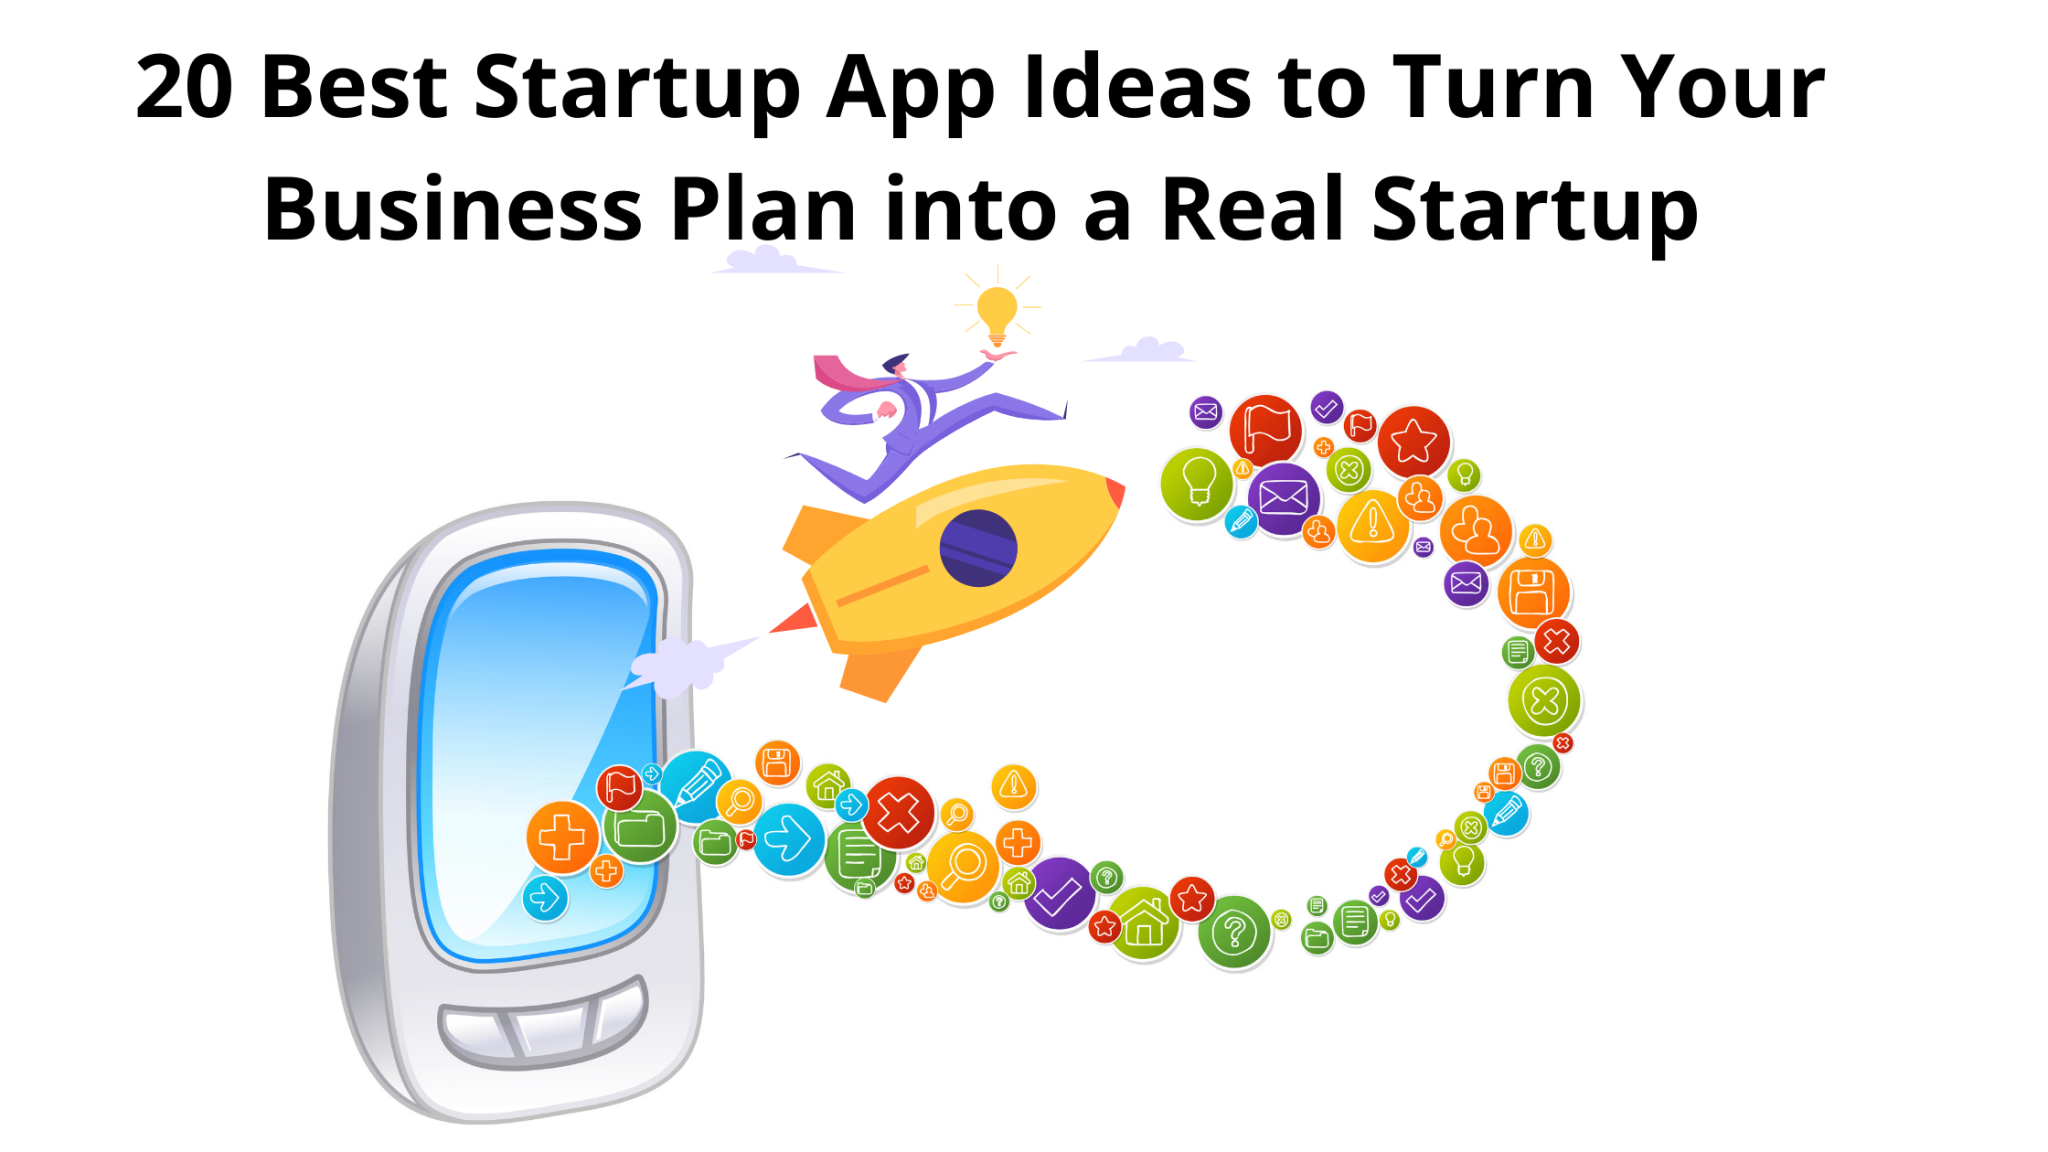 20 Best Startup App Ideas for Your Online Business